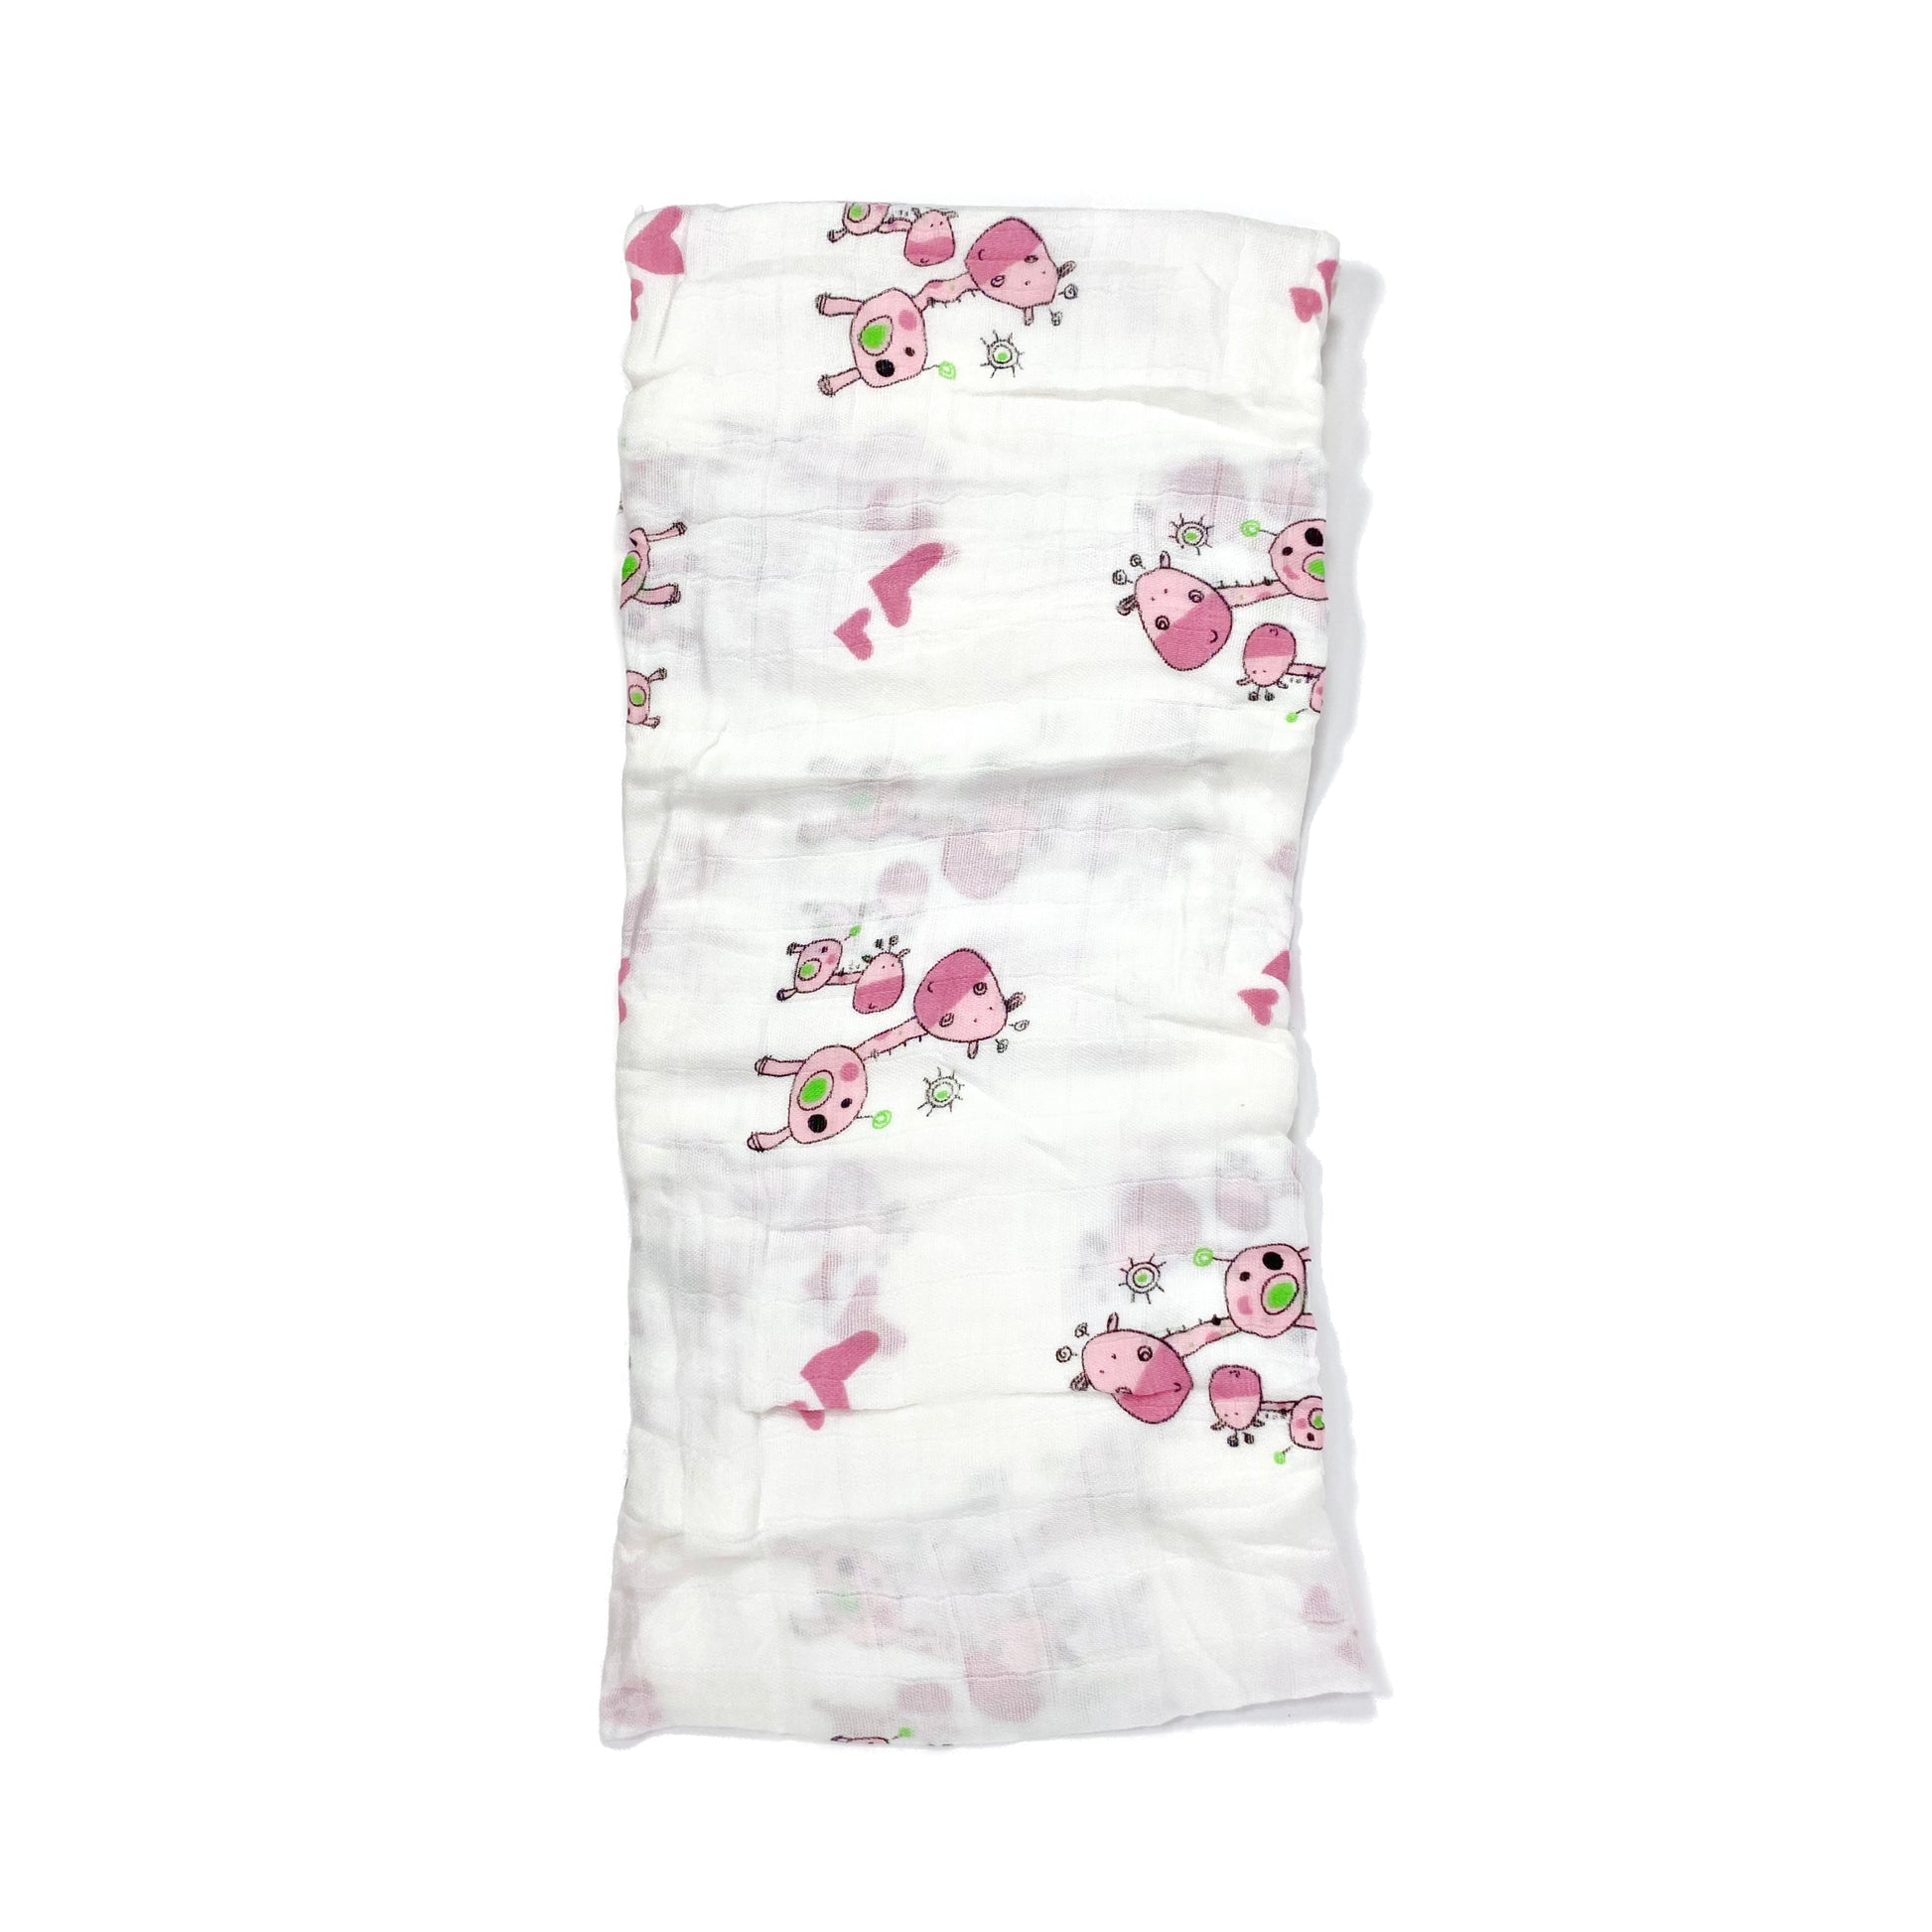 A folded muslin swaddle blanket with a pink giraffe design.